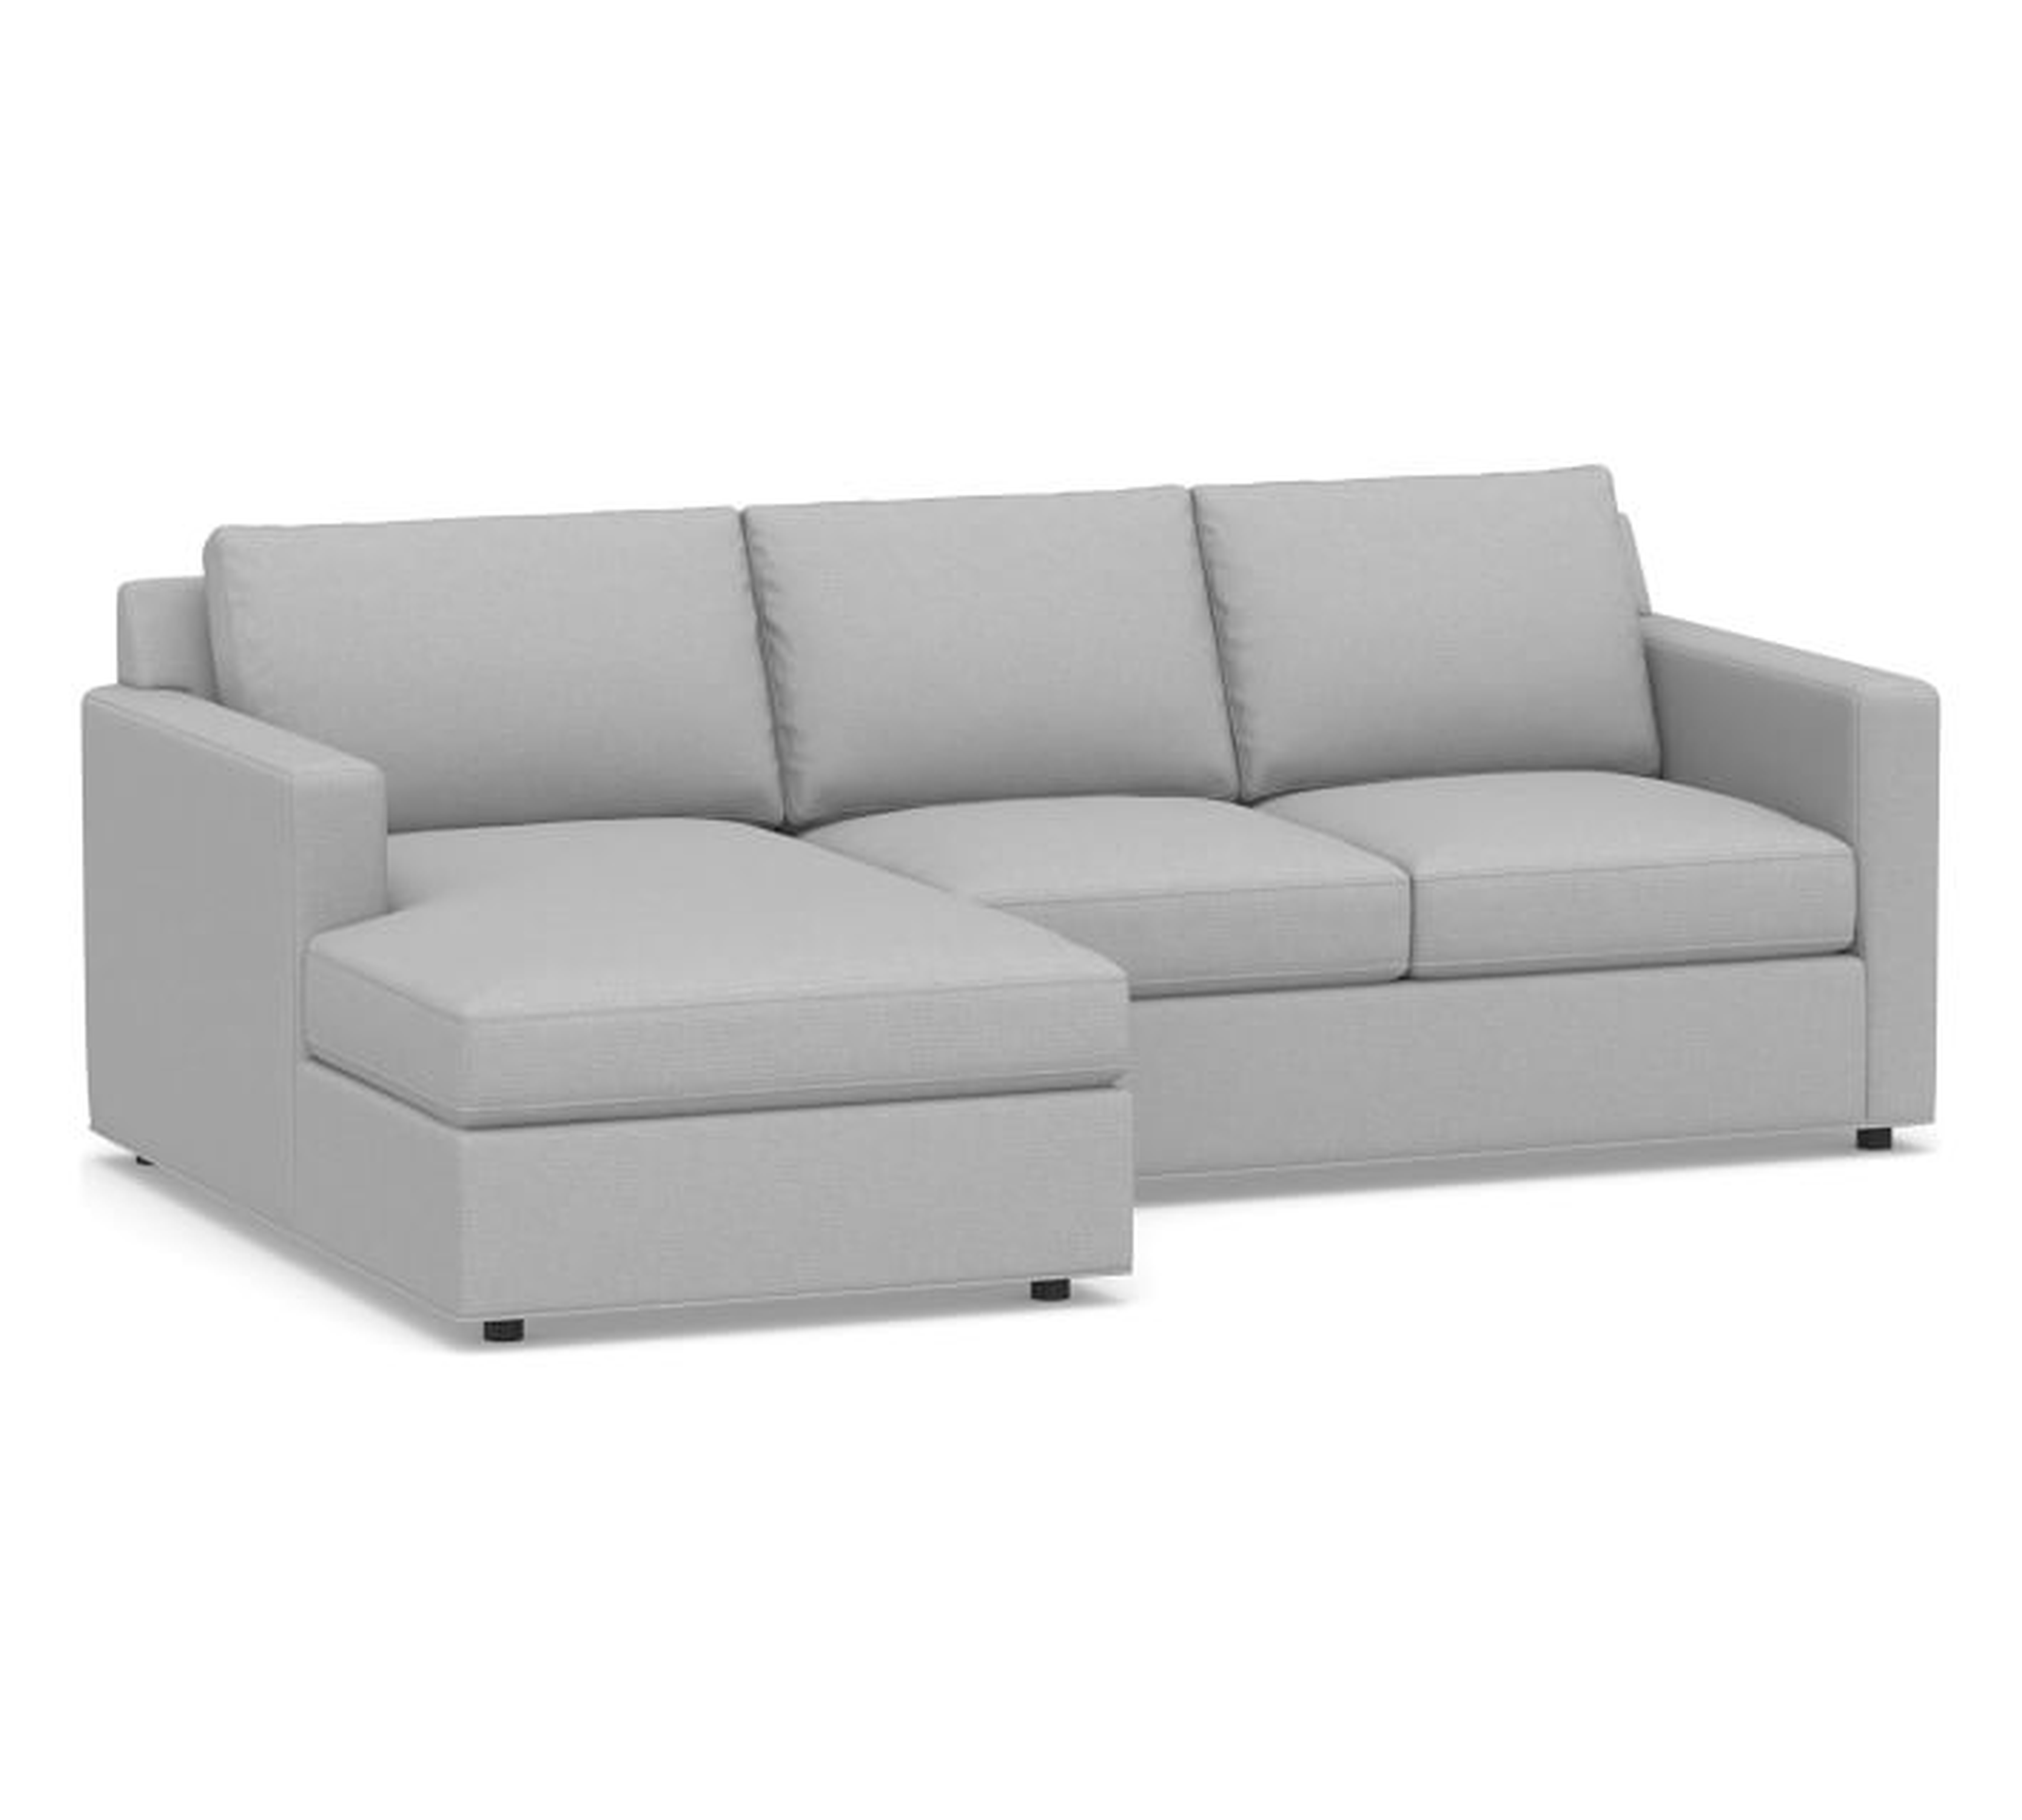 Sanford Square Arm Upholstered Right Arm Sofa with Chaise Sectional, Polyester Wrapped Cushions, Brushed Crossweave Light Gray - Pottery Barn